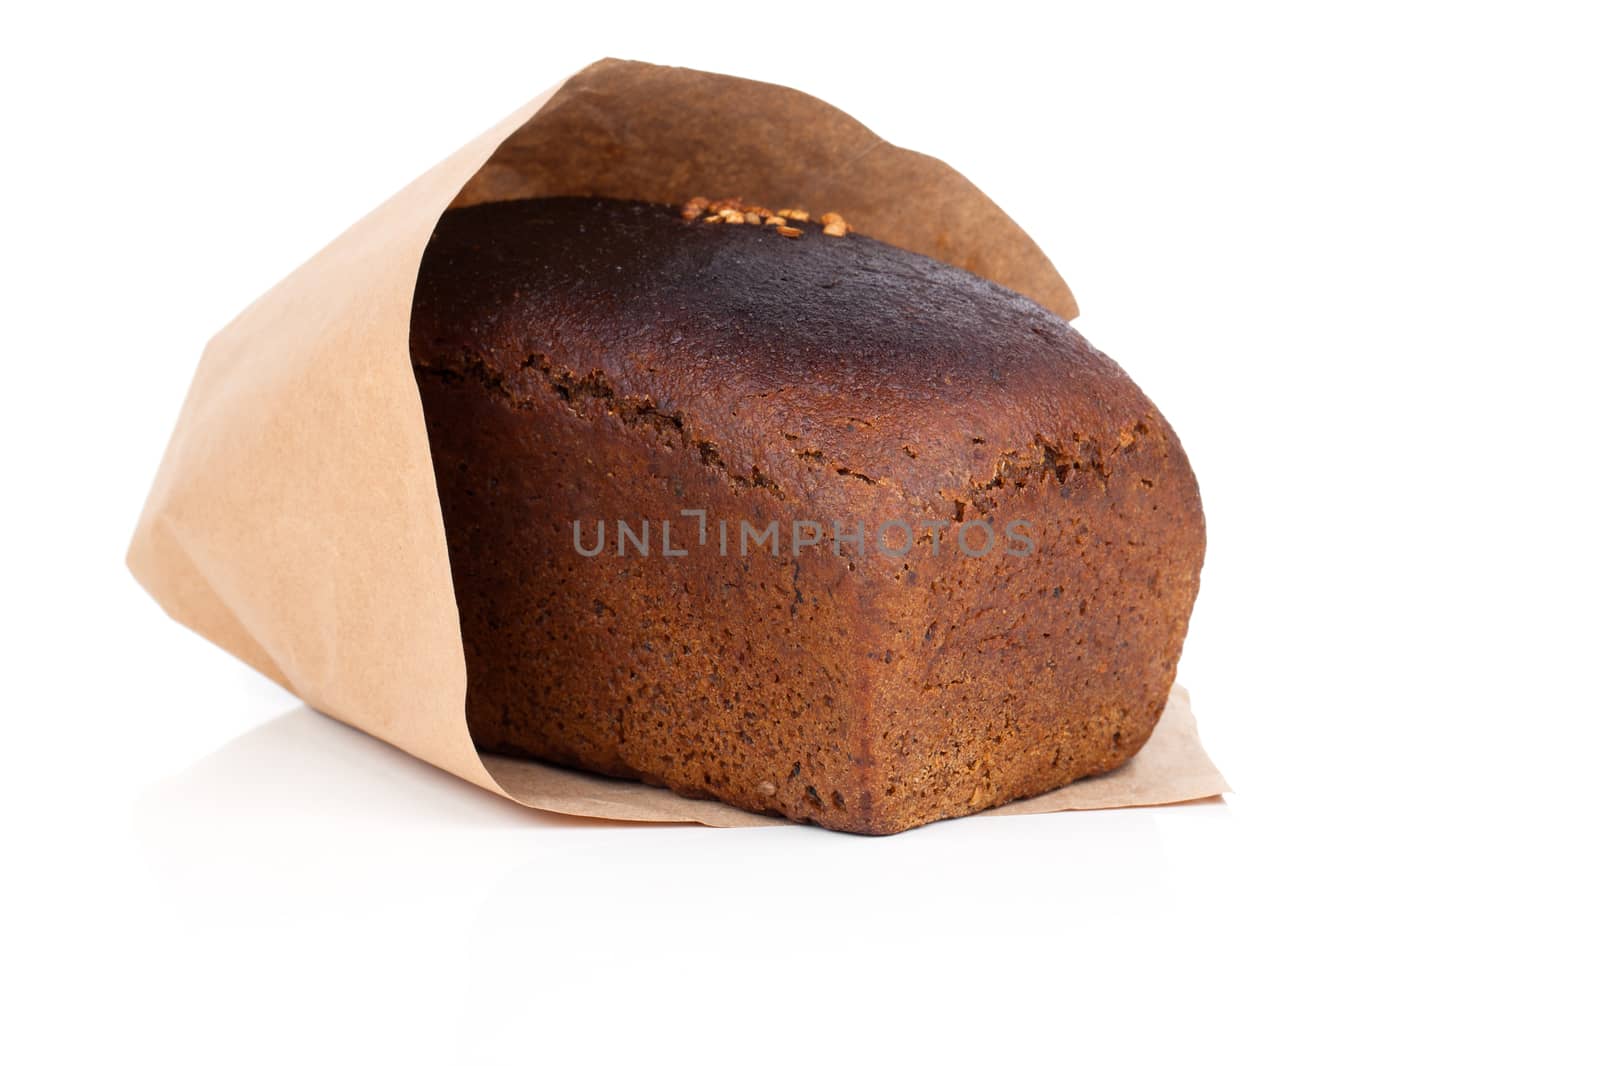 Rye bread slice in paper packaging, isolated on white background